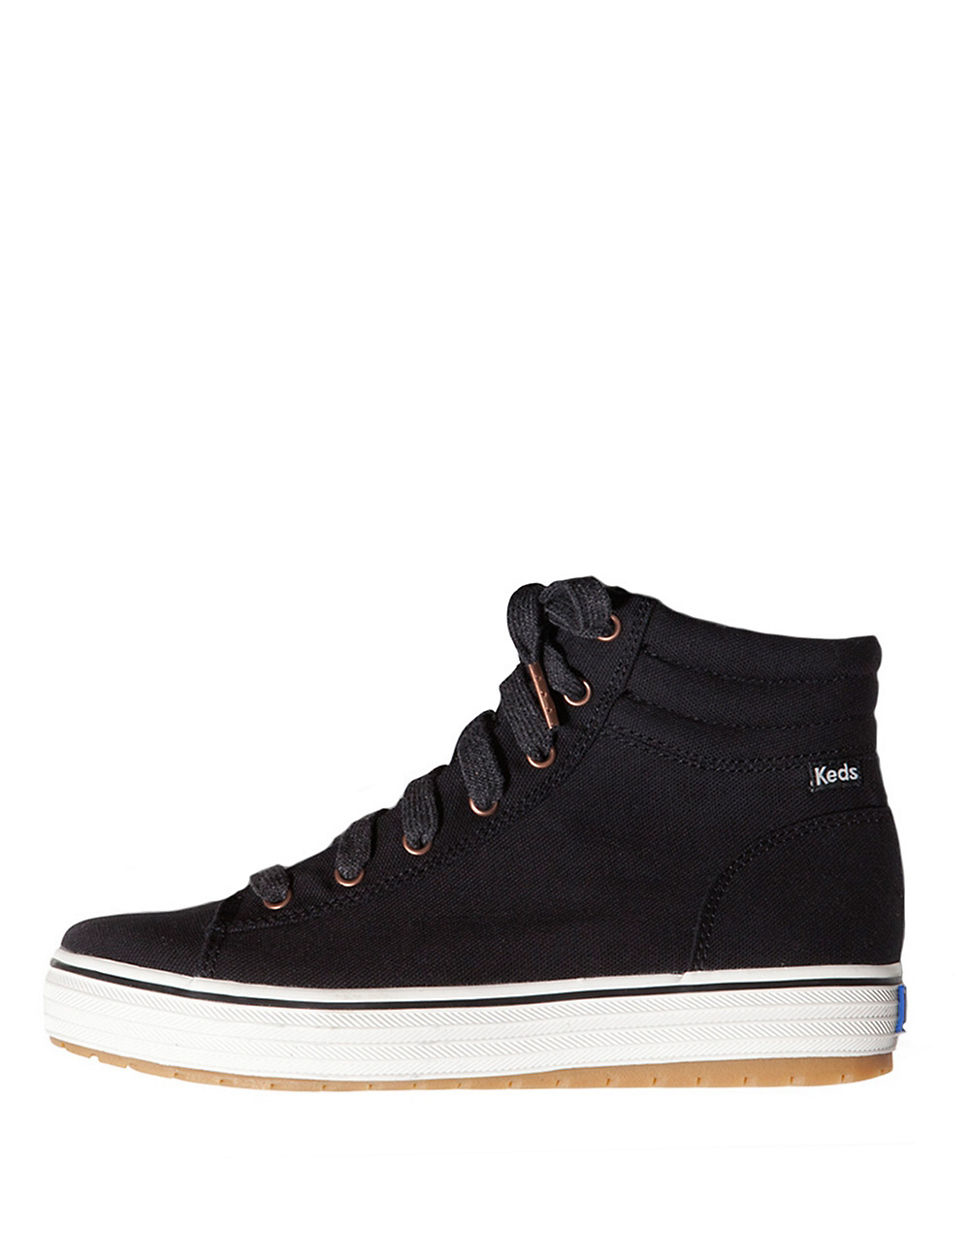 Lyst - Keds Hi Rise Canvas High-top Sneakers in Black